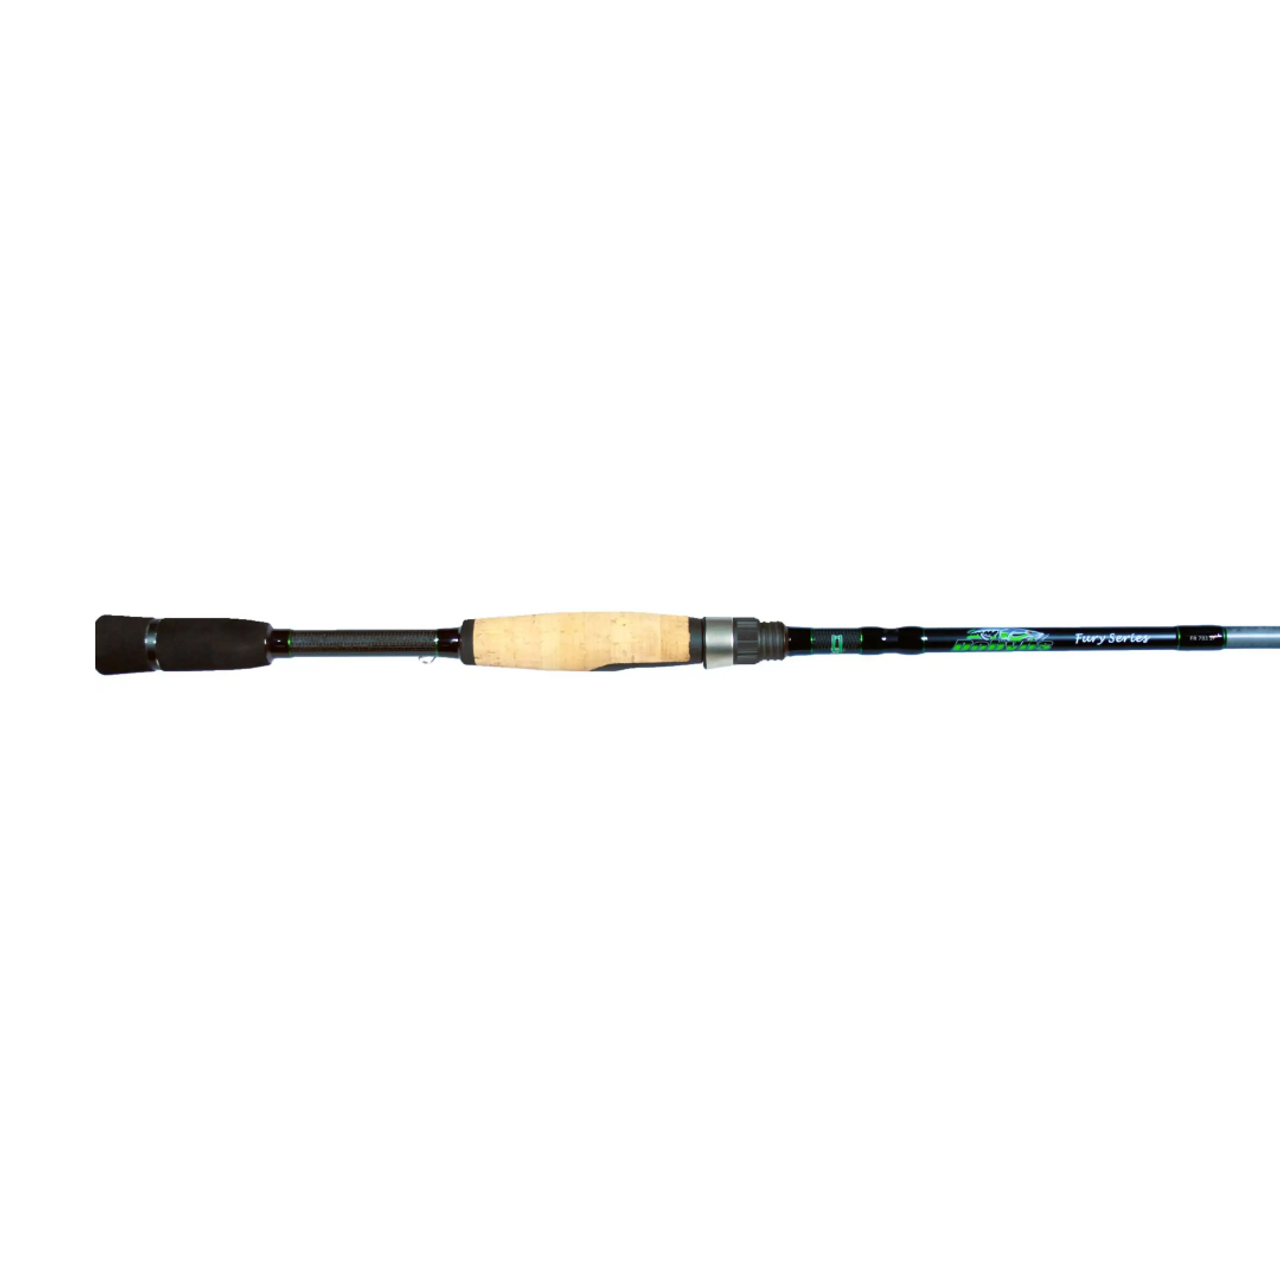 DOBYNS FURY SERIES SPINNING ROD